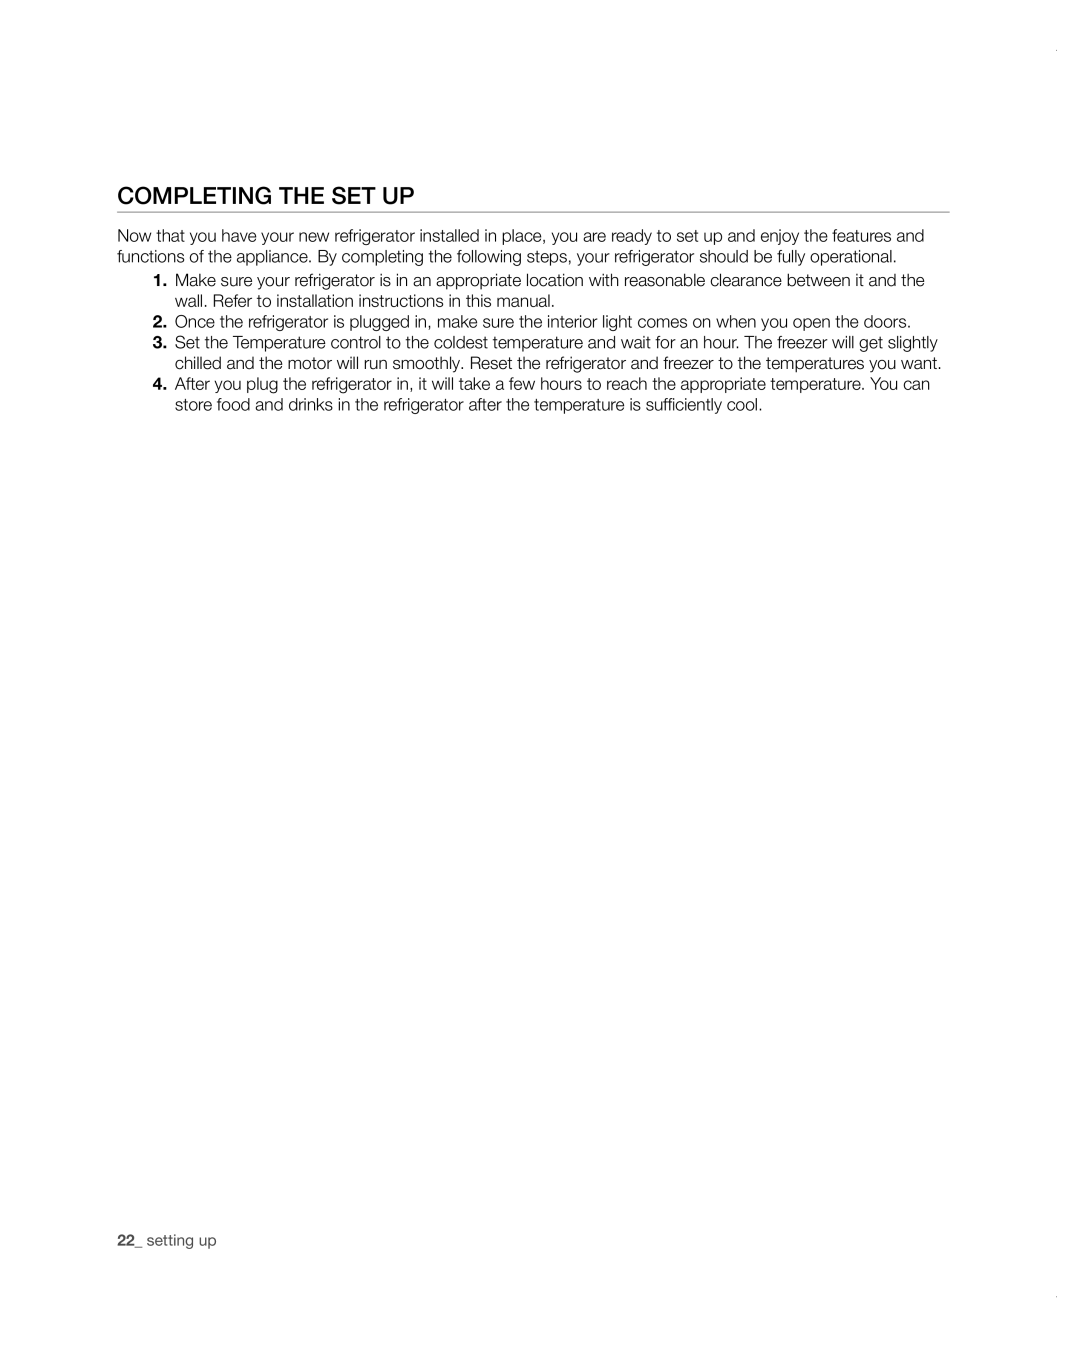 Samsung RF4287HARS user manual Completing the set up, setting up 